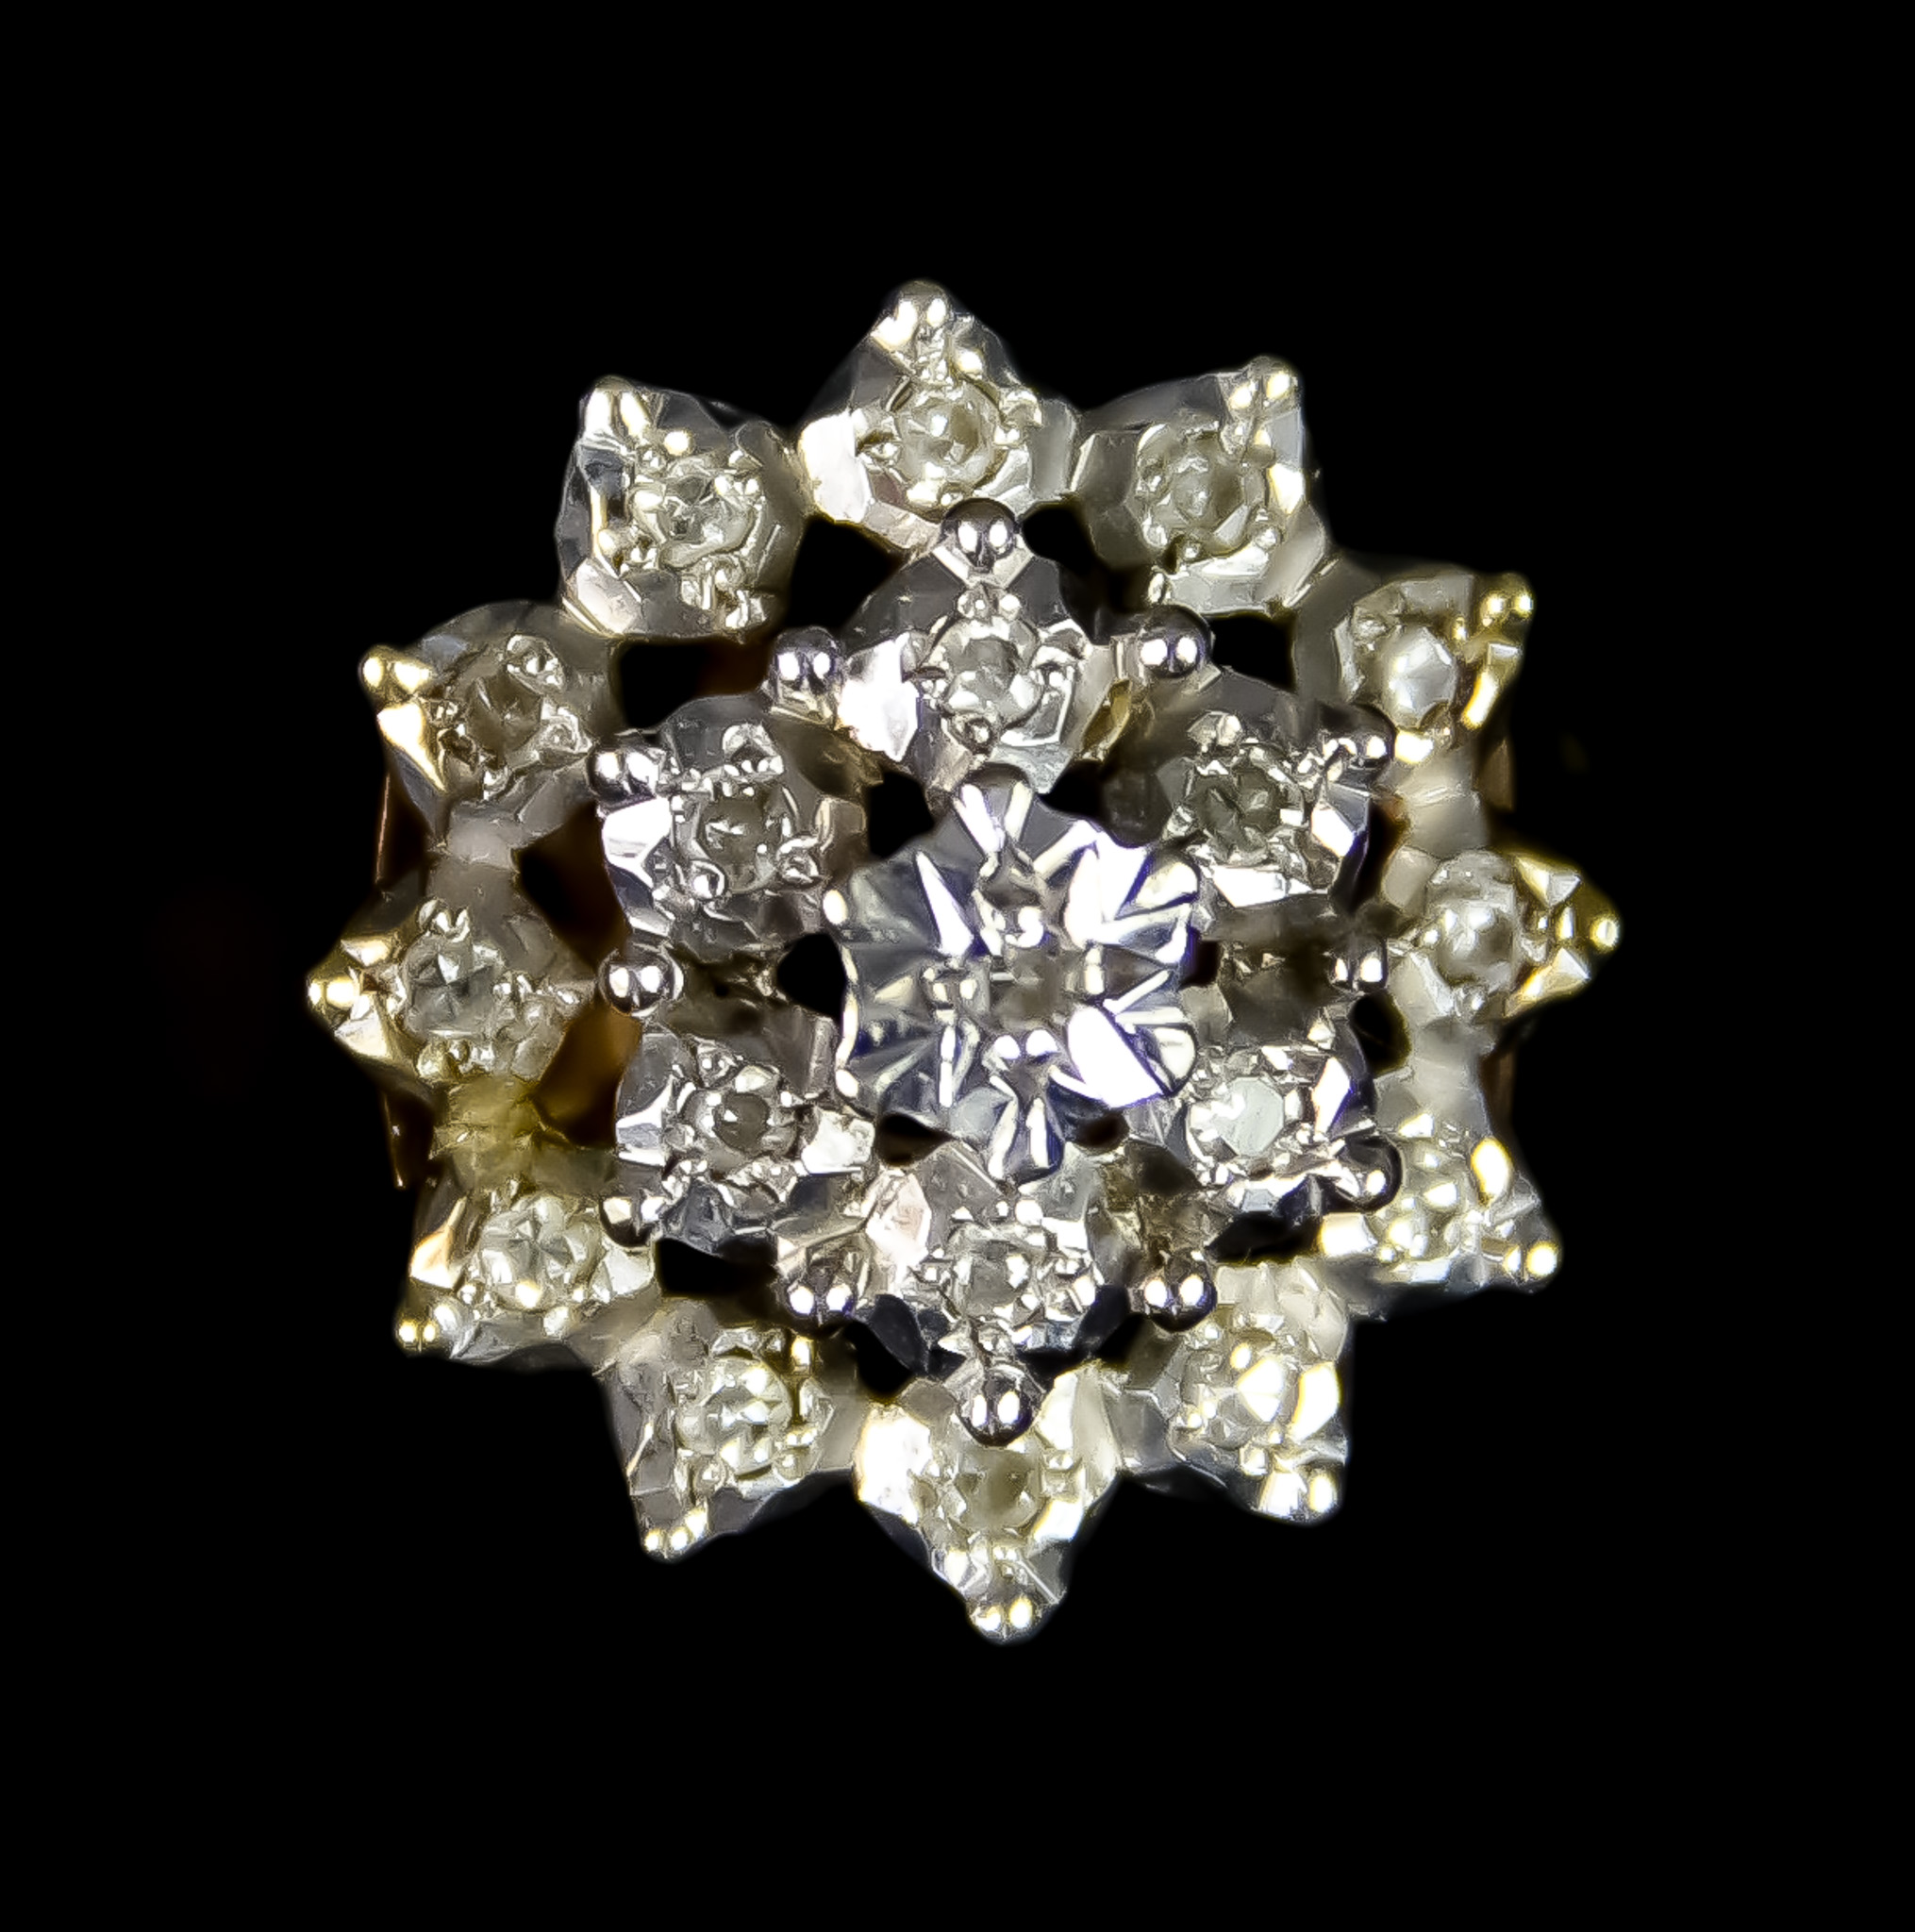 A 9ct Gold Diamond Cluster Ring, 20th Century, set with small brilliant cut white diamonds,